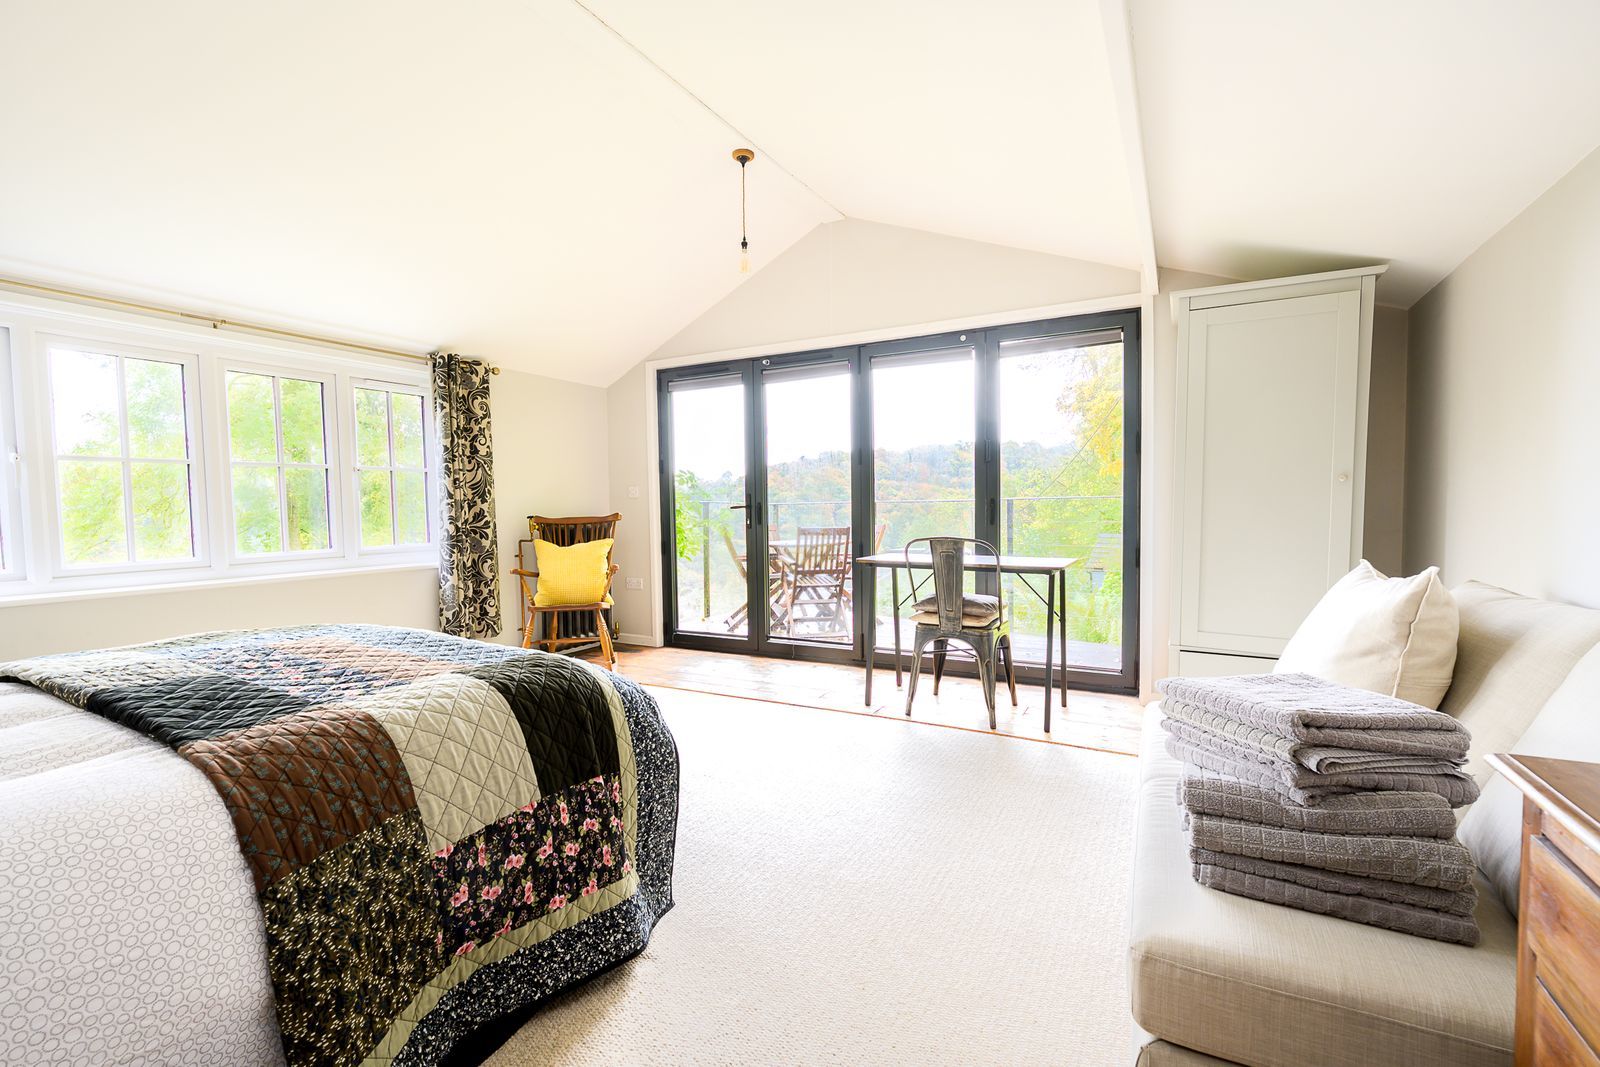 The master bedroom has its own balcony. Picture: Hamilton Stiller Estate Agents/Zoopla